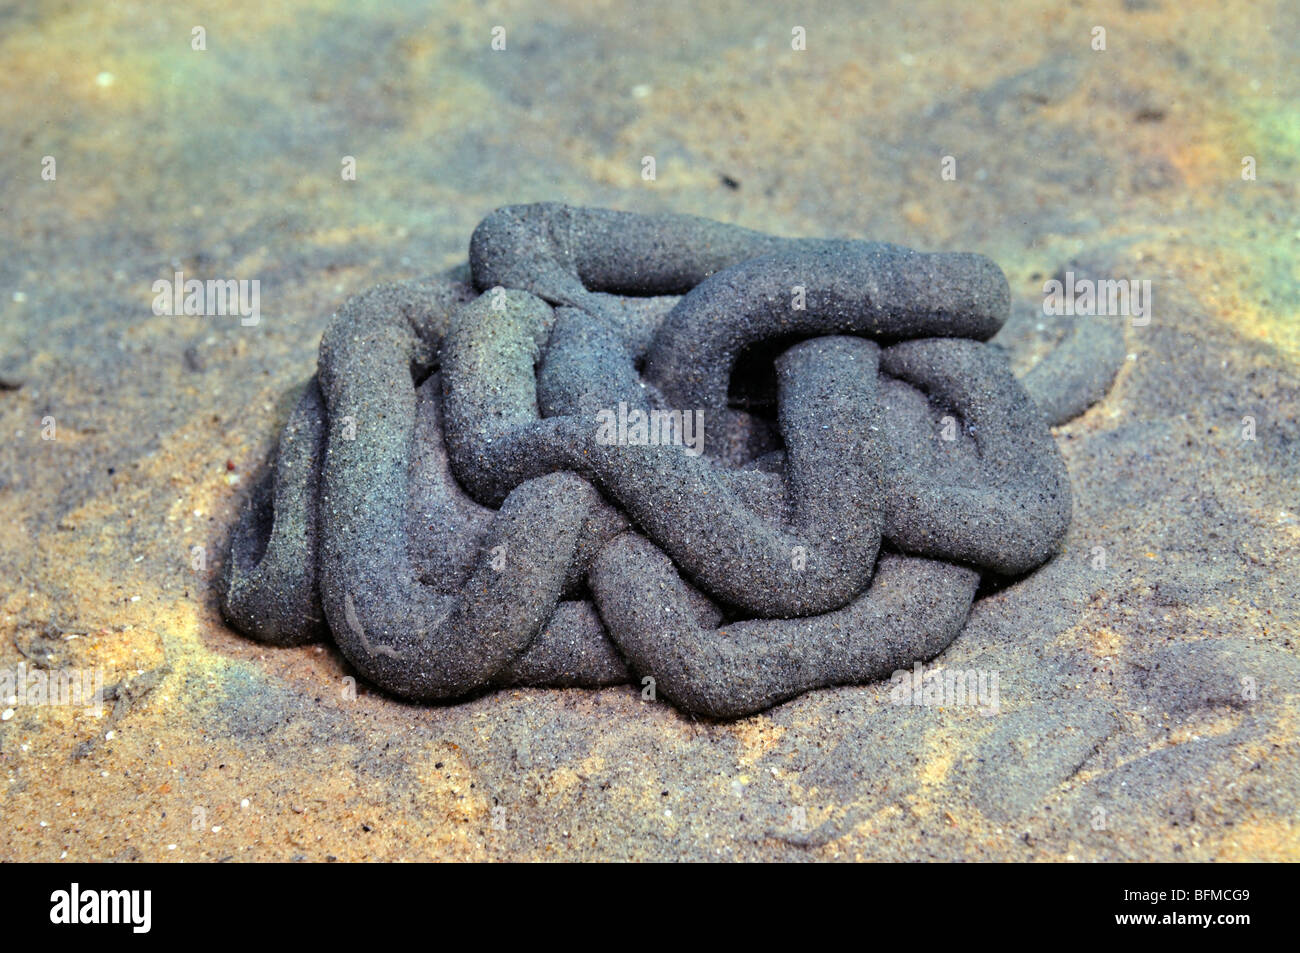 Worm cast underwater at shallow depth on sand, Red Sea Stock Photo - Alamy